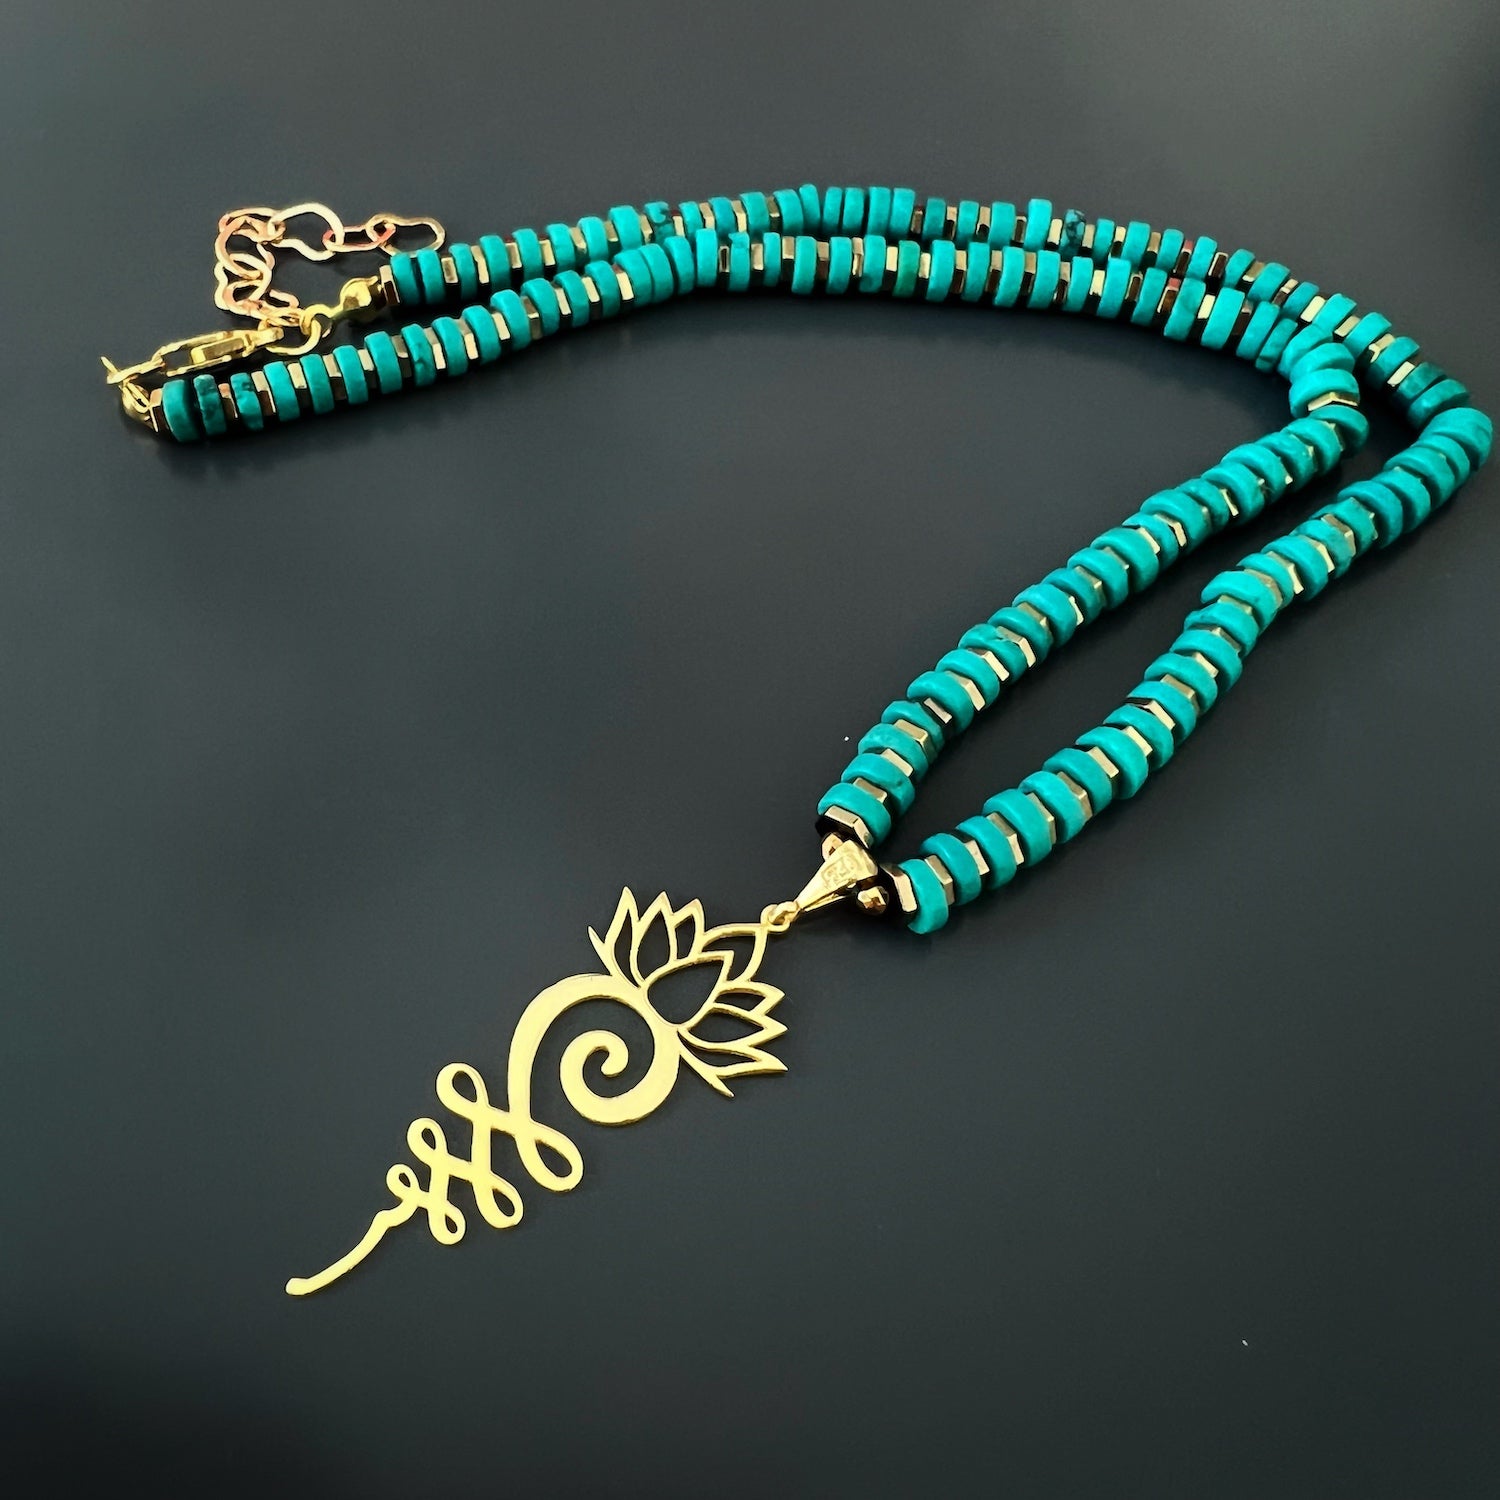 The tranquil beauty of the Turquoise Unalome Serenity Necklace, perfect for fostering inner peace